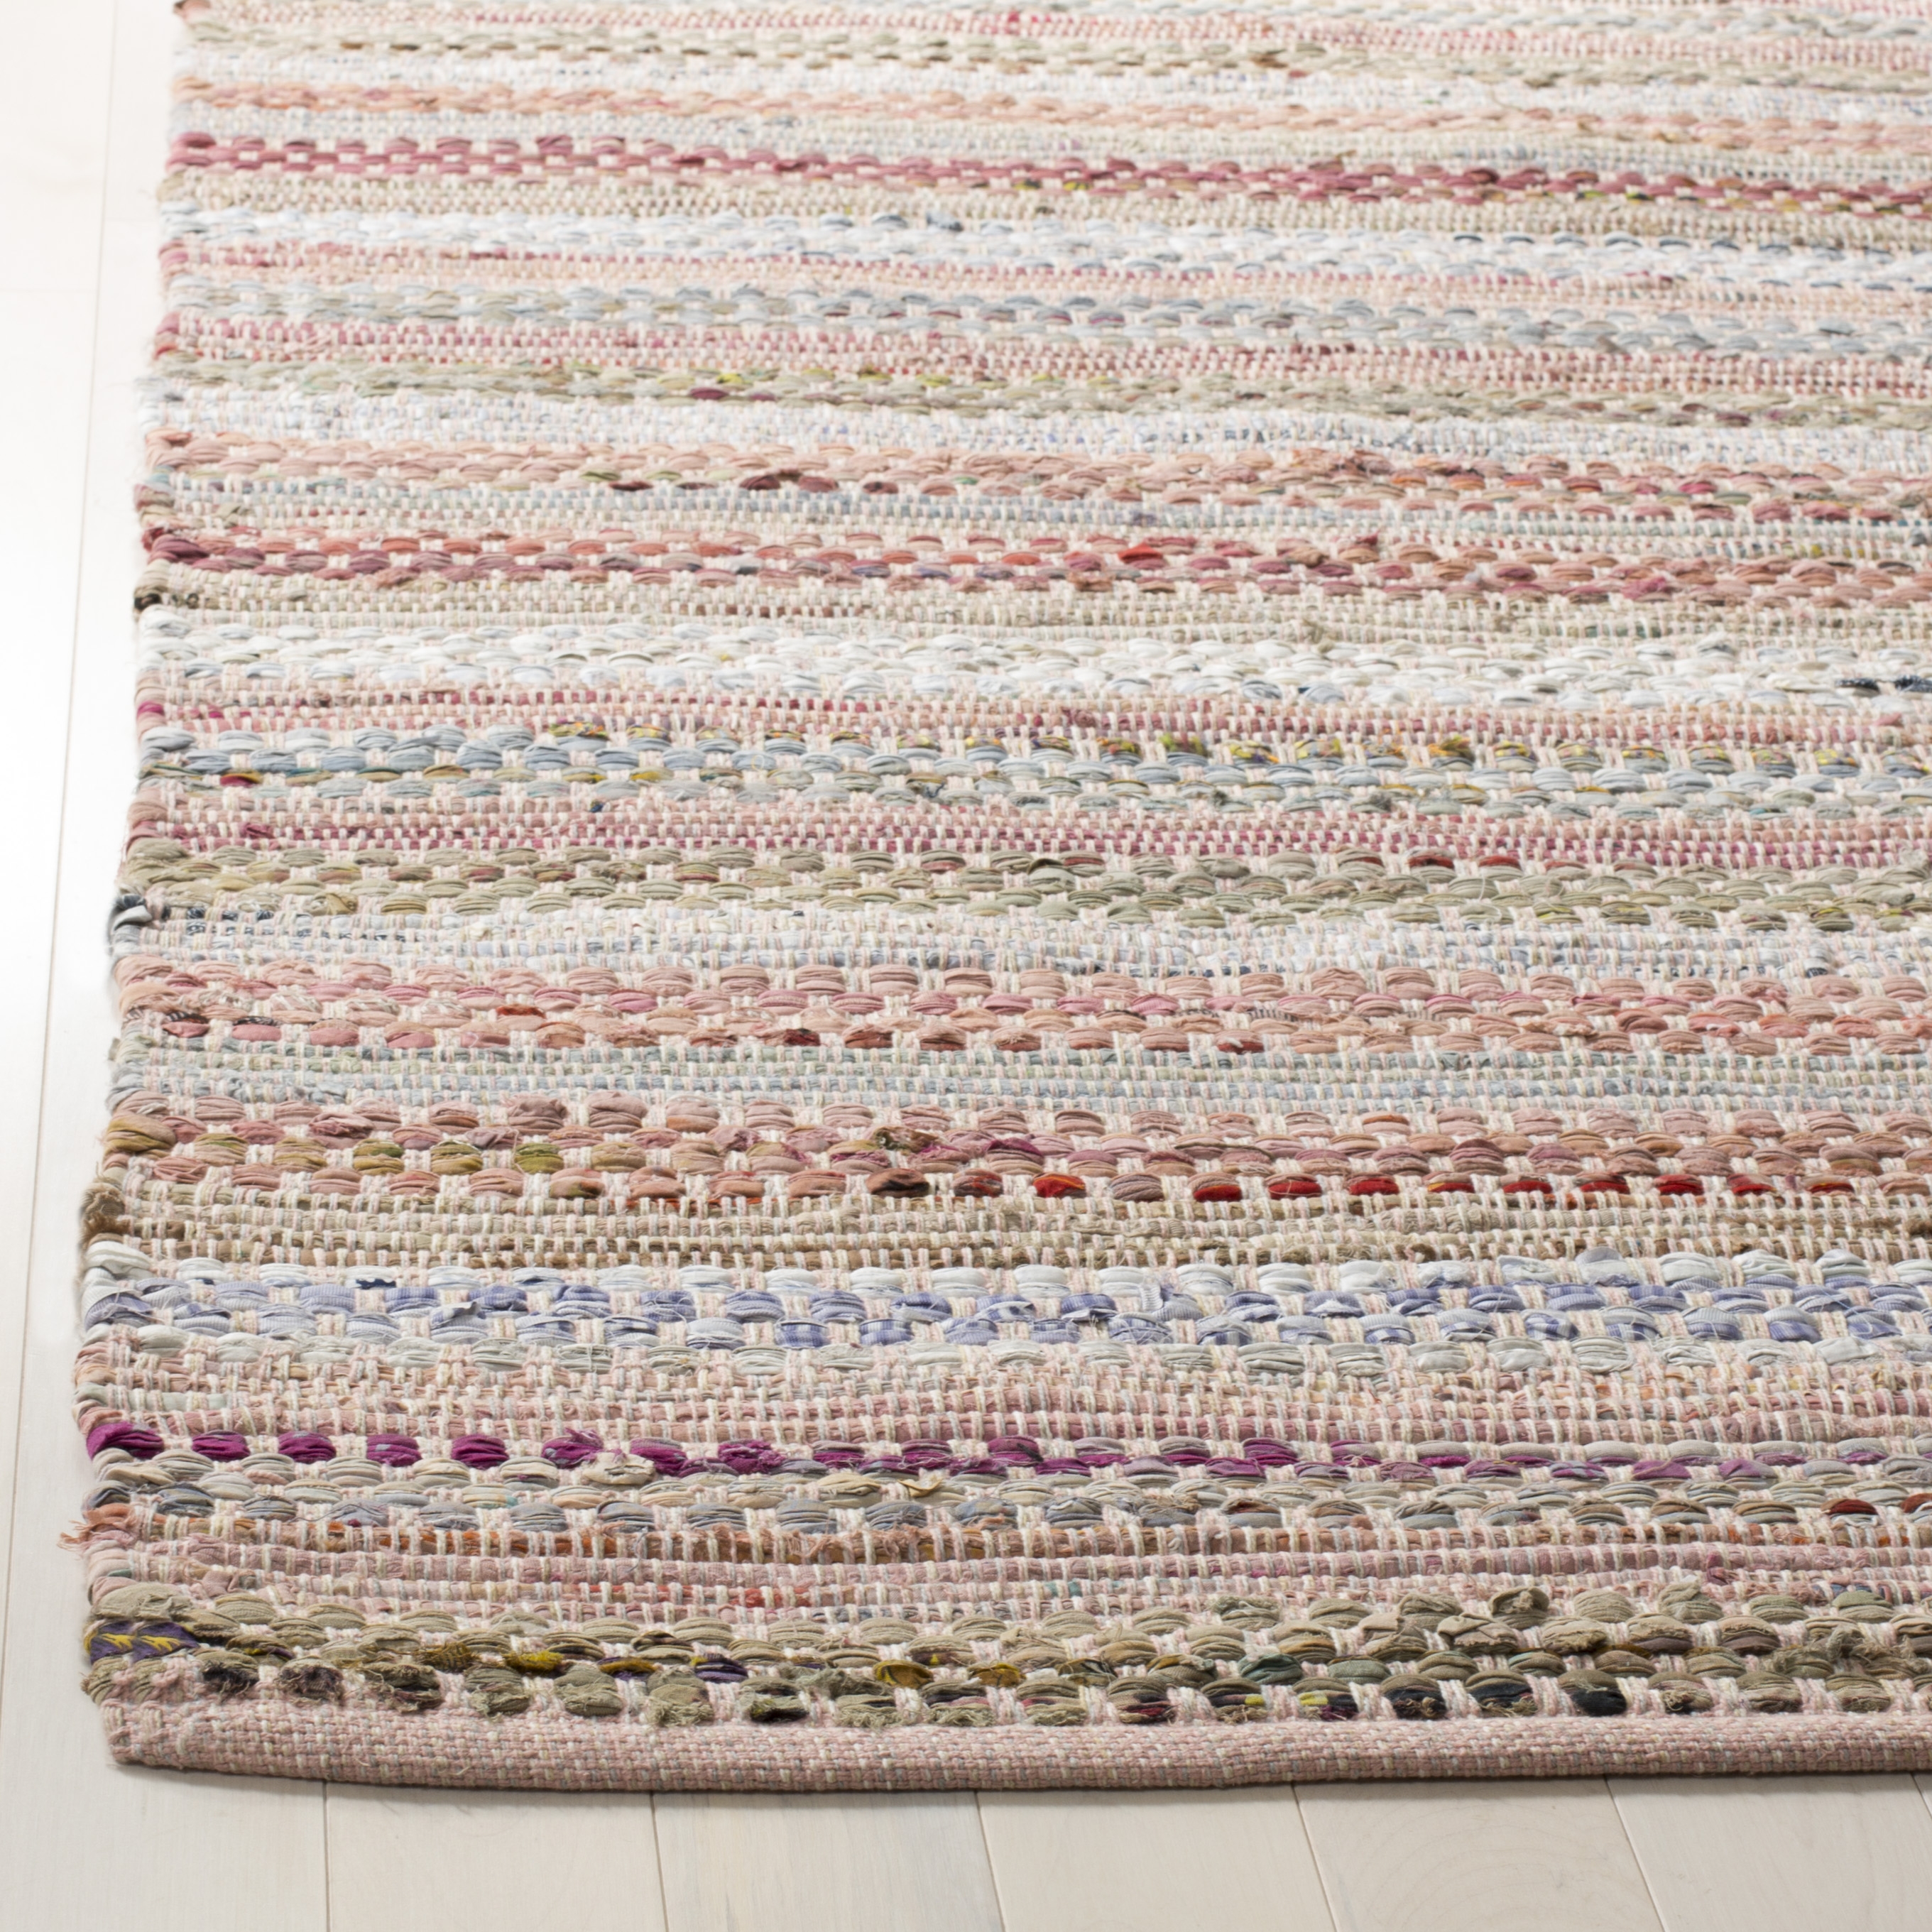 Arlo Home Hand Woven Area Rug, MTK975D, Pink/Multi,  2' 6" X 4' - Image 1